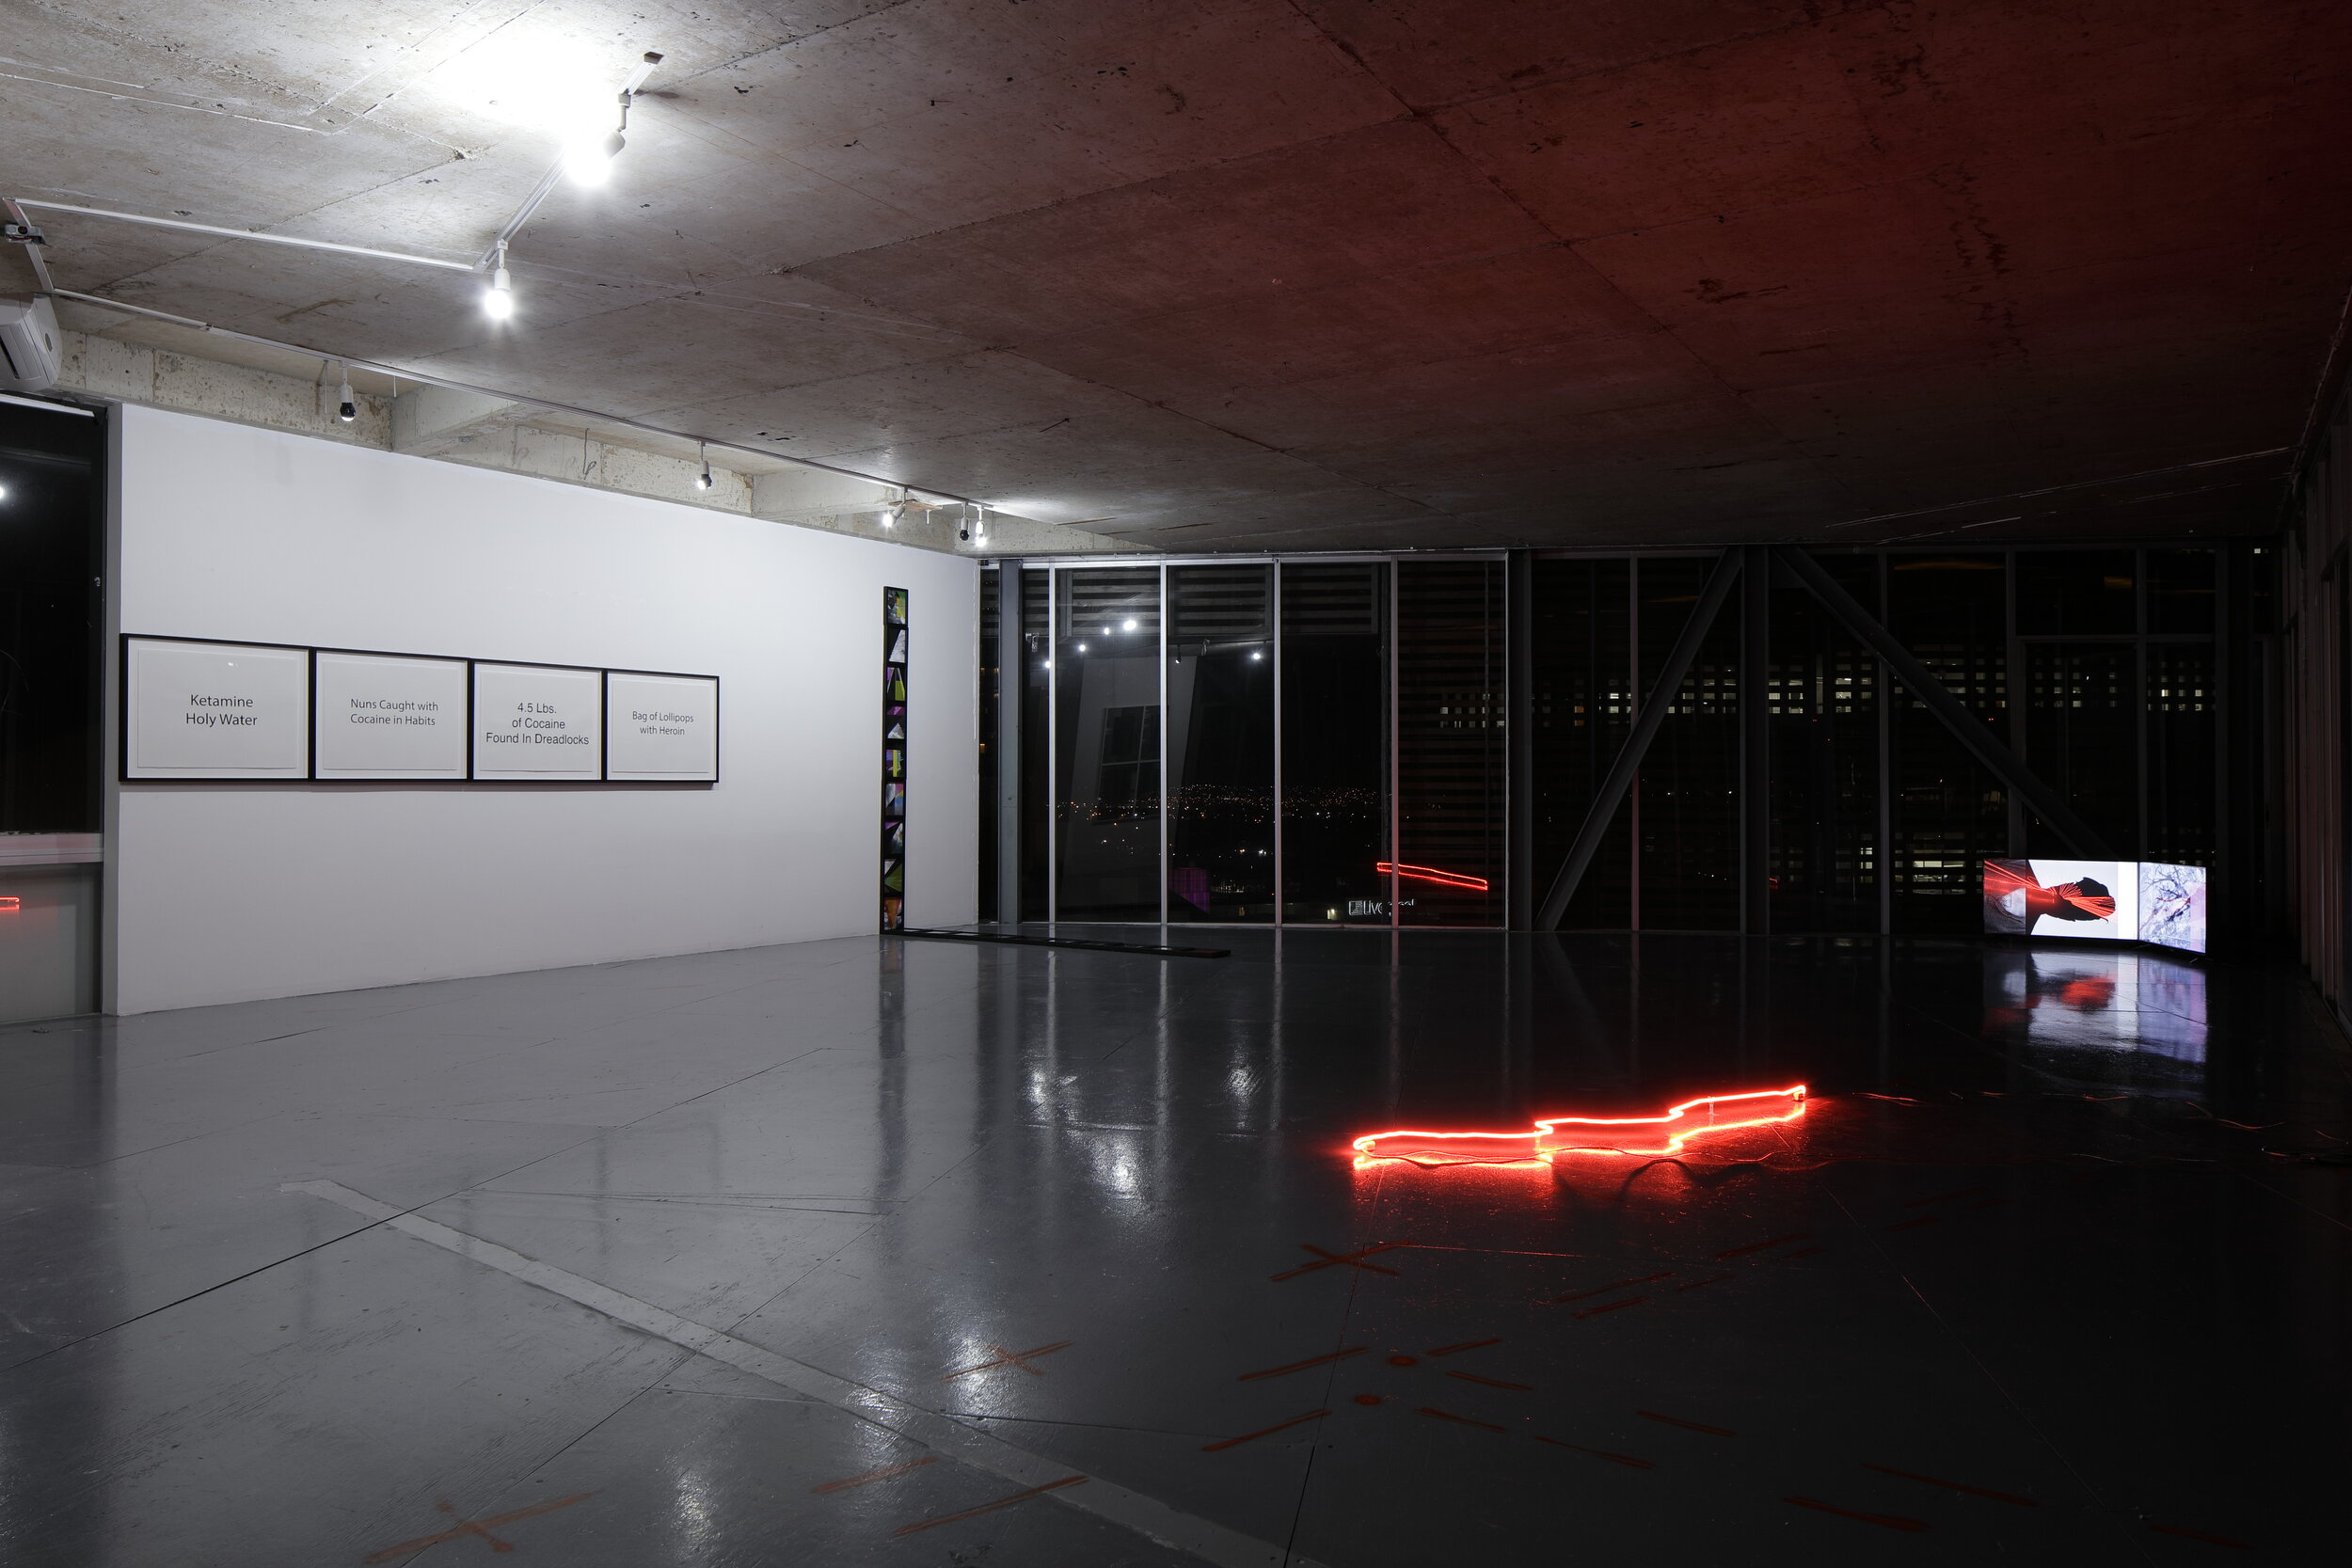   Julio César Morales: This World is Not For You,  installation view, Gallery Wendi Norris Offsite, Torre Cube, Floor 13, Guadalajara, Mexico, February 2 - 28, 2018 